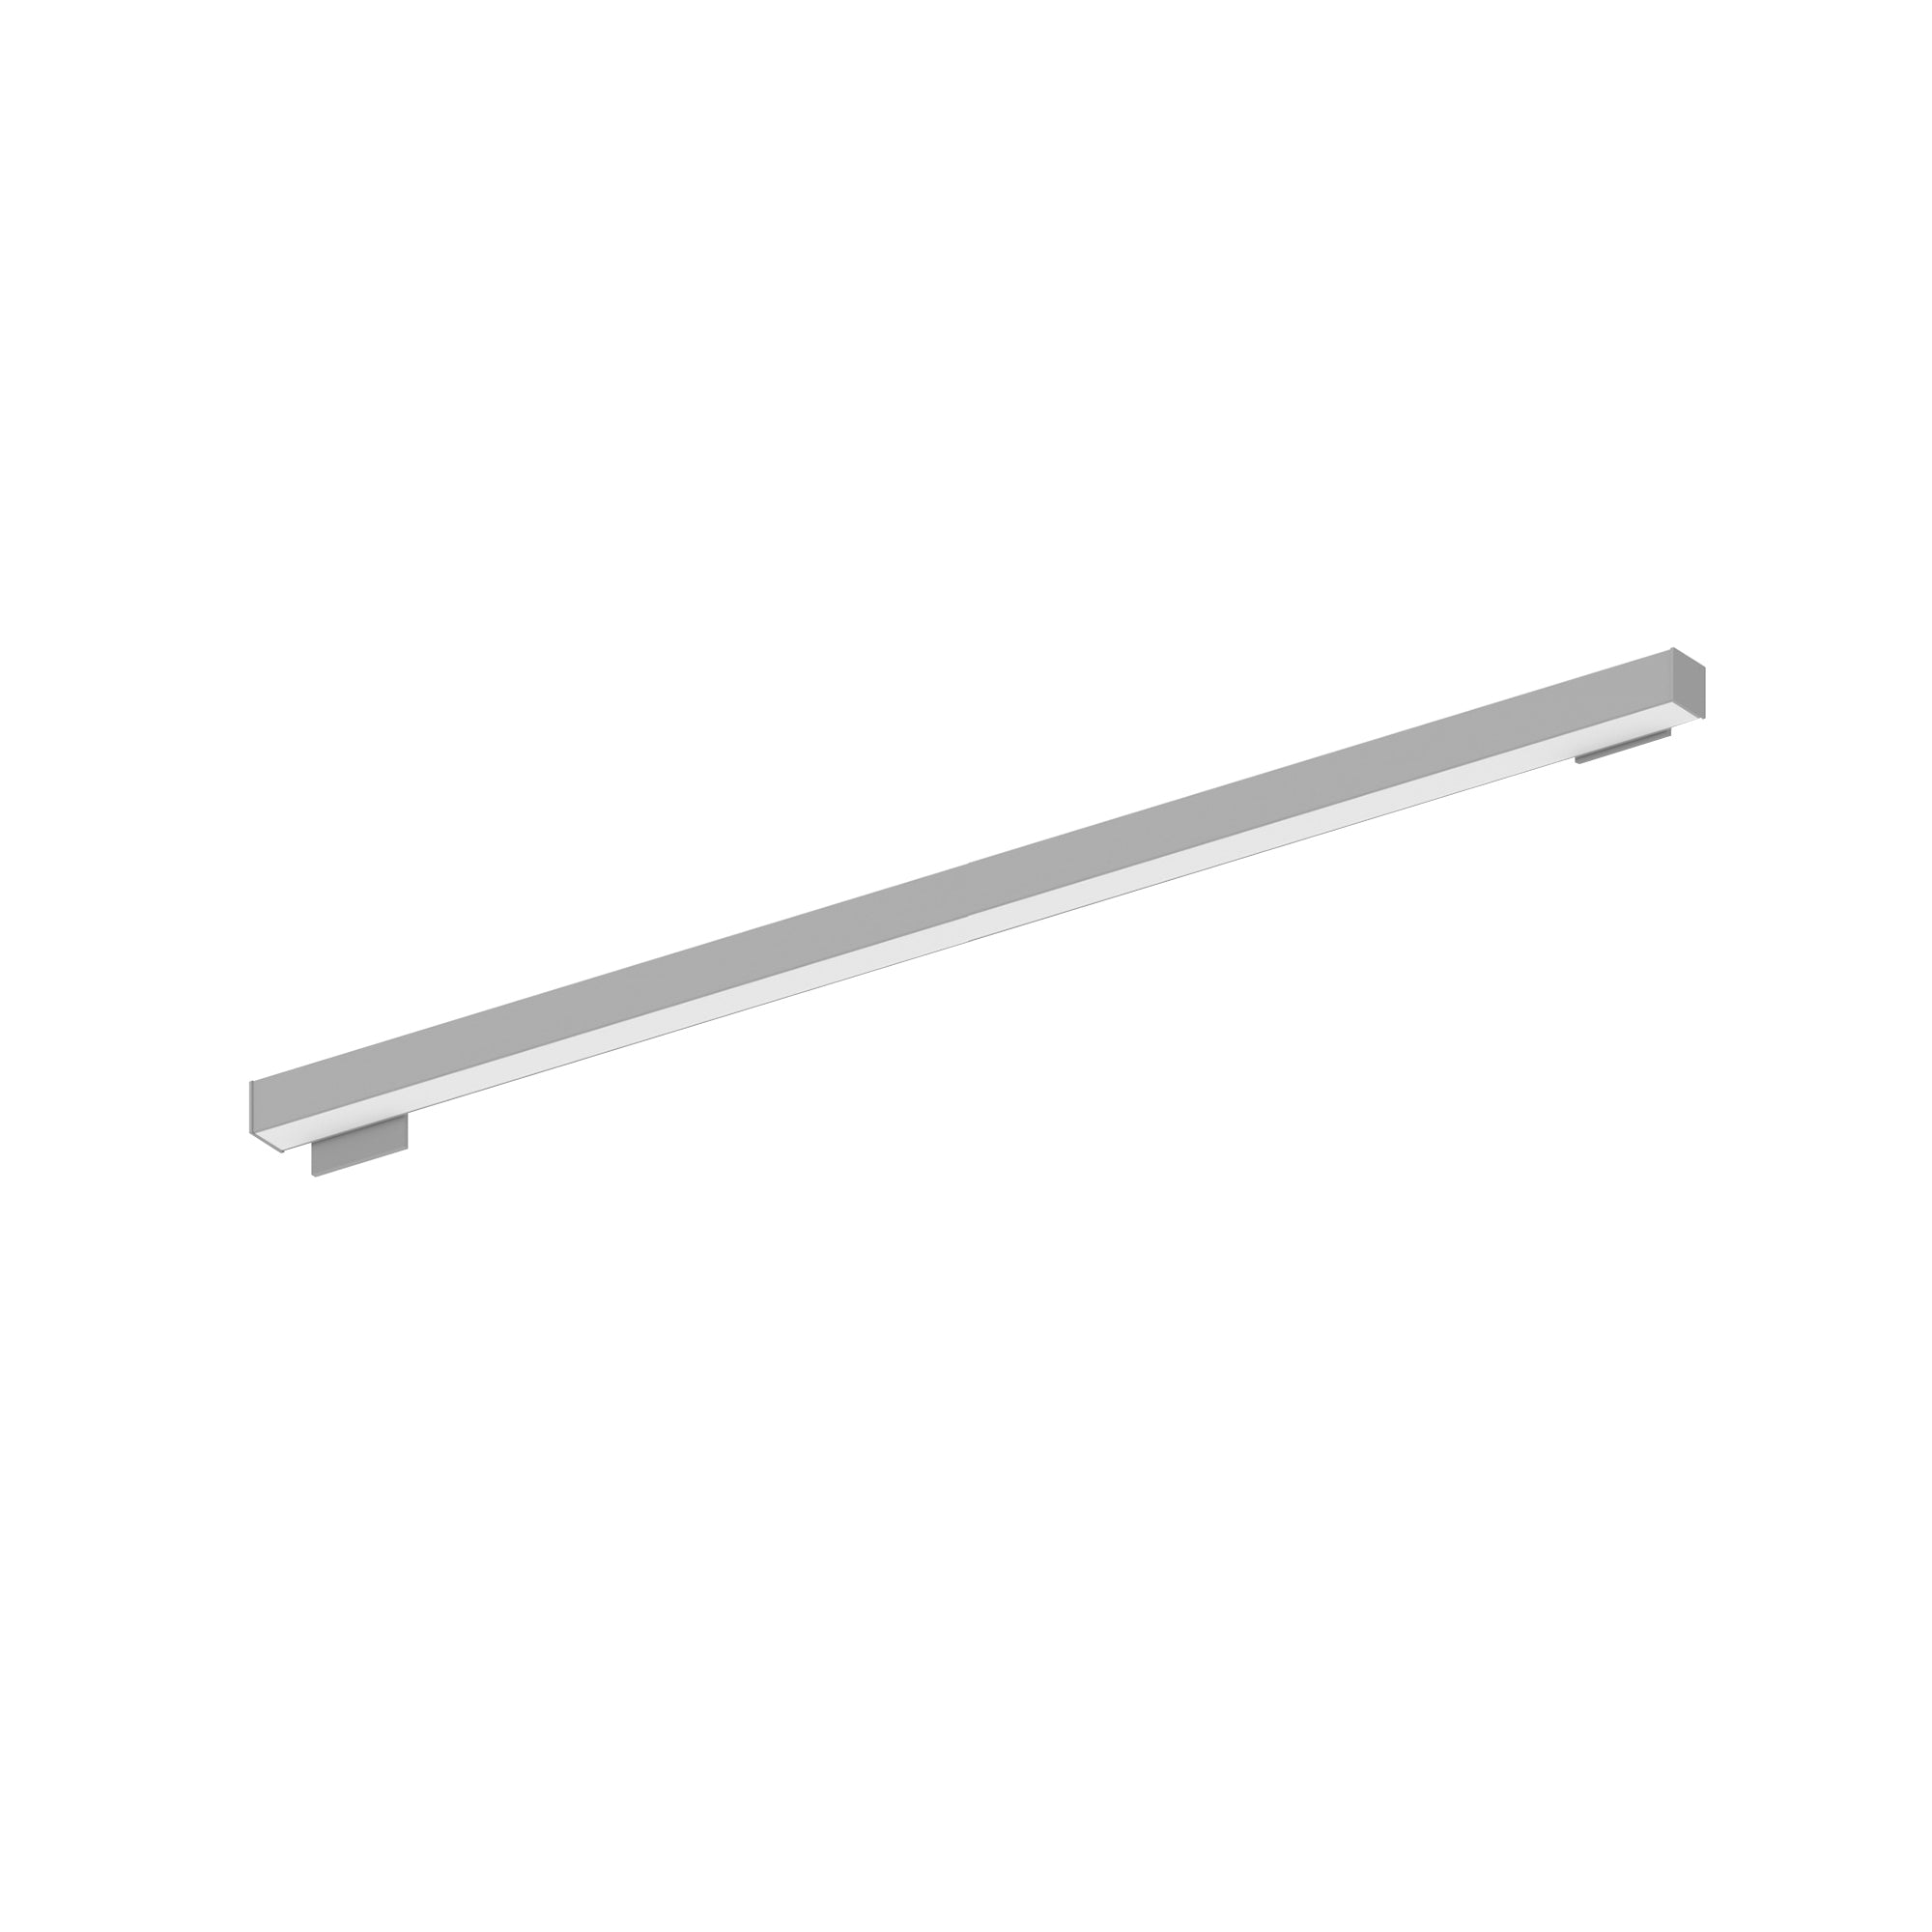 Nora Lighting NWLIN-81040A/L4-R2P - Linear - 8' L-Line LED Wall Mount Linear, 8400lm / 4000K, 4 Inchx4 Inch Left Plate & 2 Inchx4 Inch Right Plate, Right Power Feed, Aluminum Finish